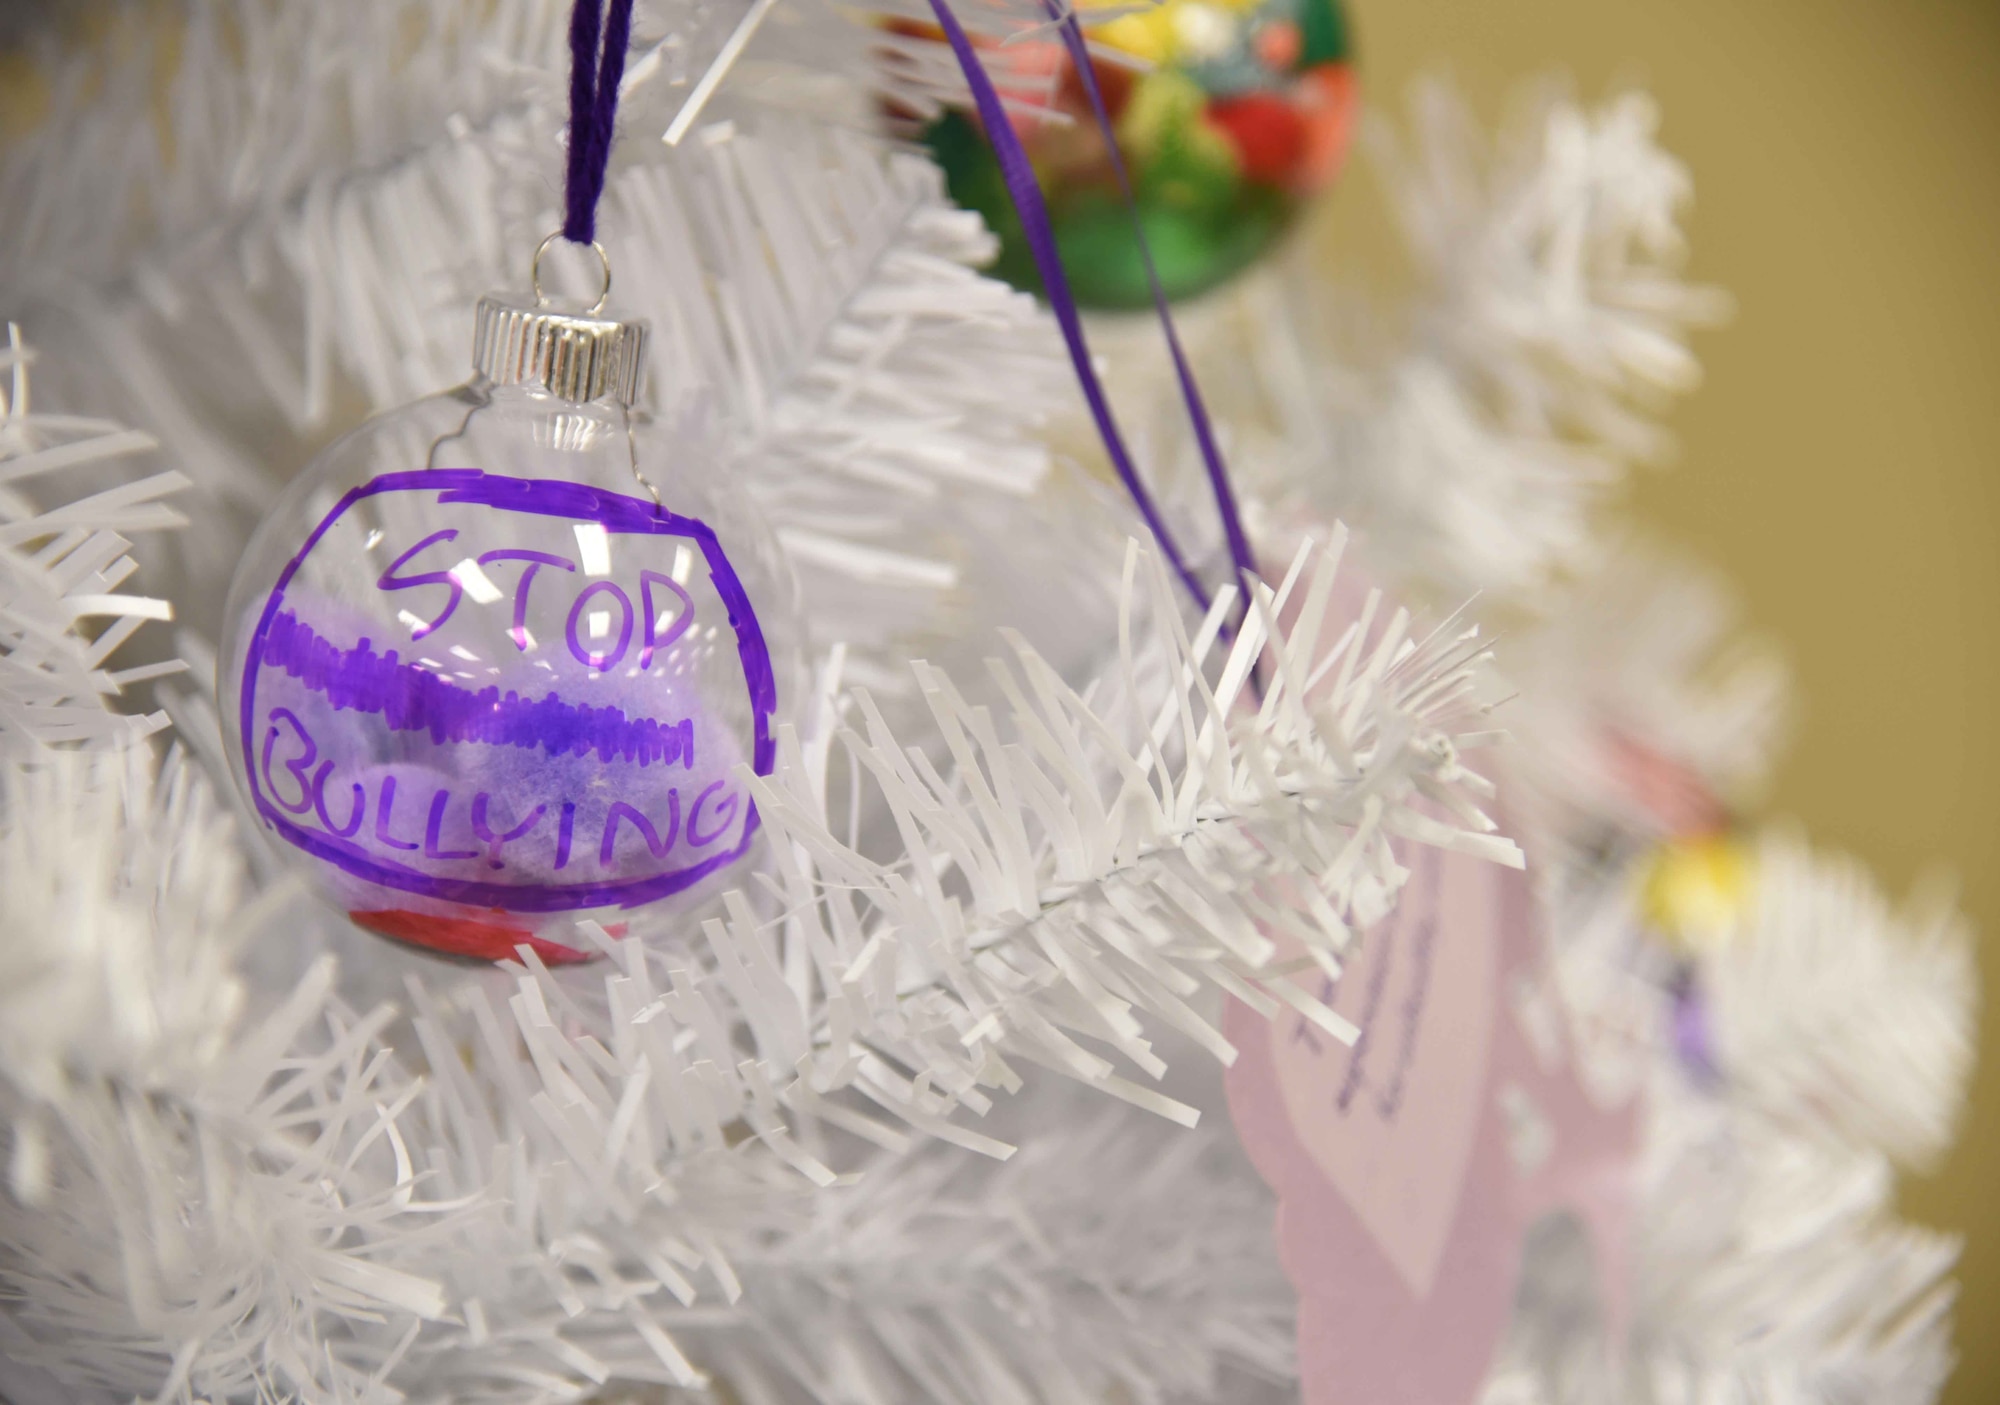 A remembrance tree with 25 ornaments displaying facts about Teen Dating Violence Awareness Month is located in McConnell’s Youth Center during the month of February. Children created their own ornaments in recognition of the observance. (U.S. Air Force photo/Airman 1st Class Erin McClellan)